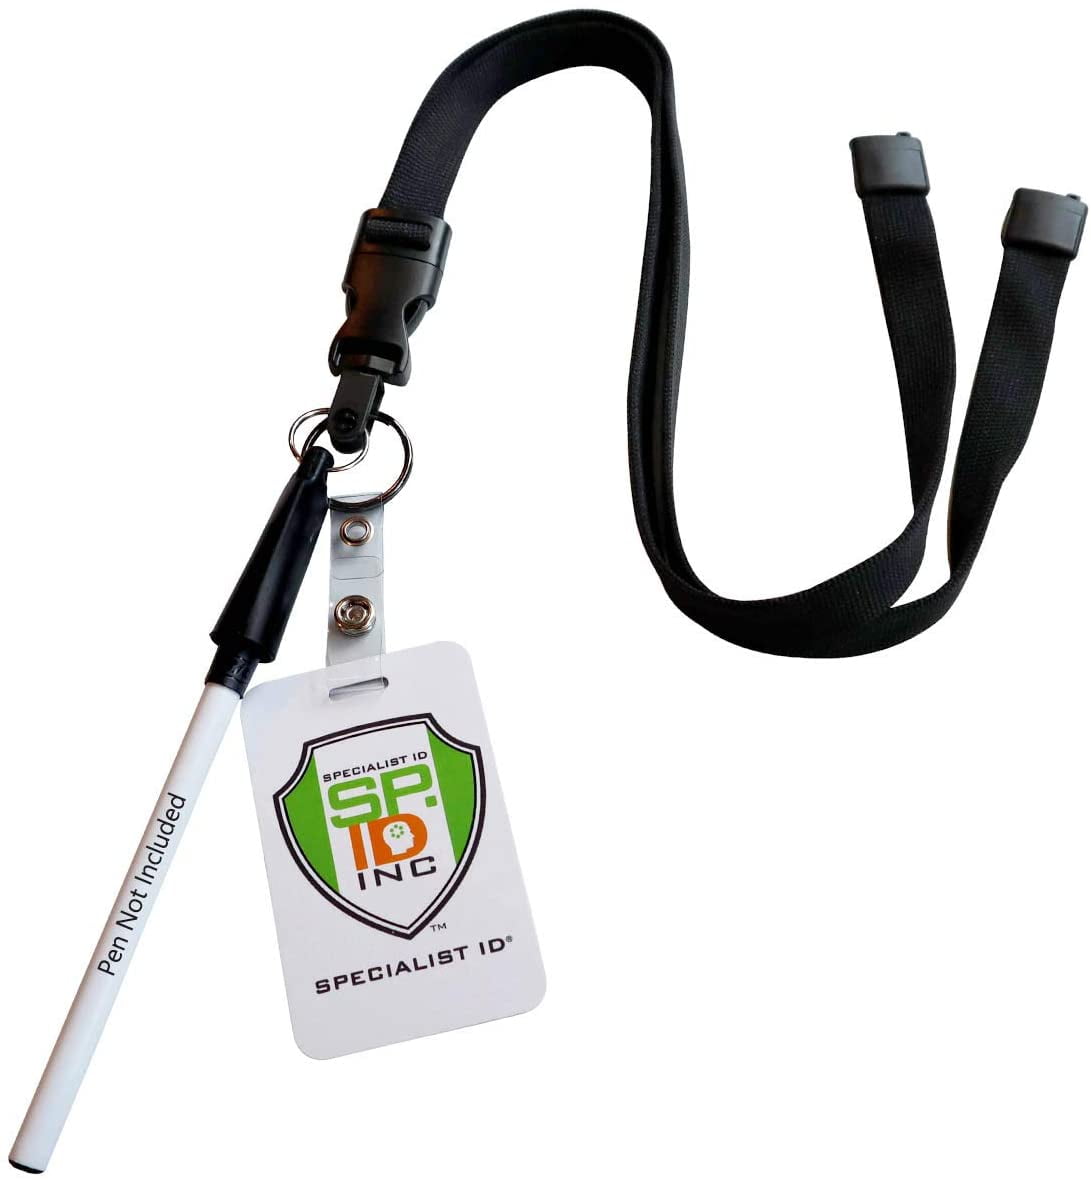 Member Trainer Security ID Cool Funky Lanyard For The Gym GYM TIME LANYARD 